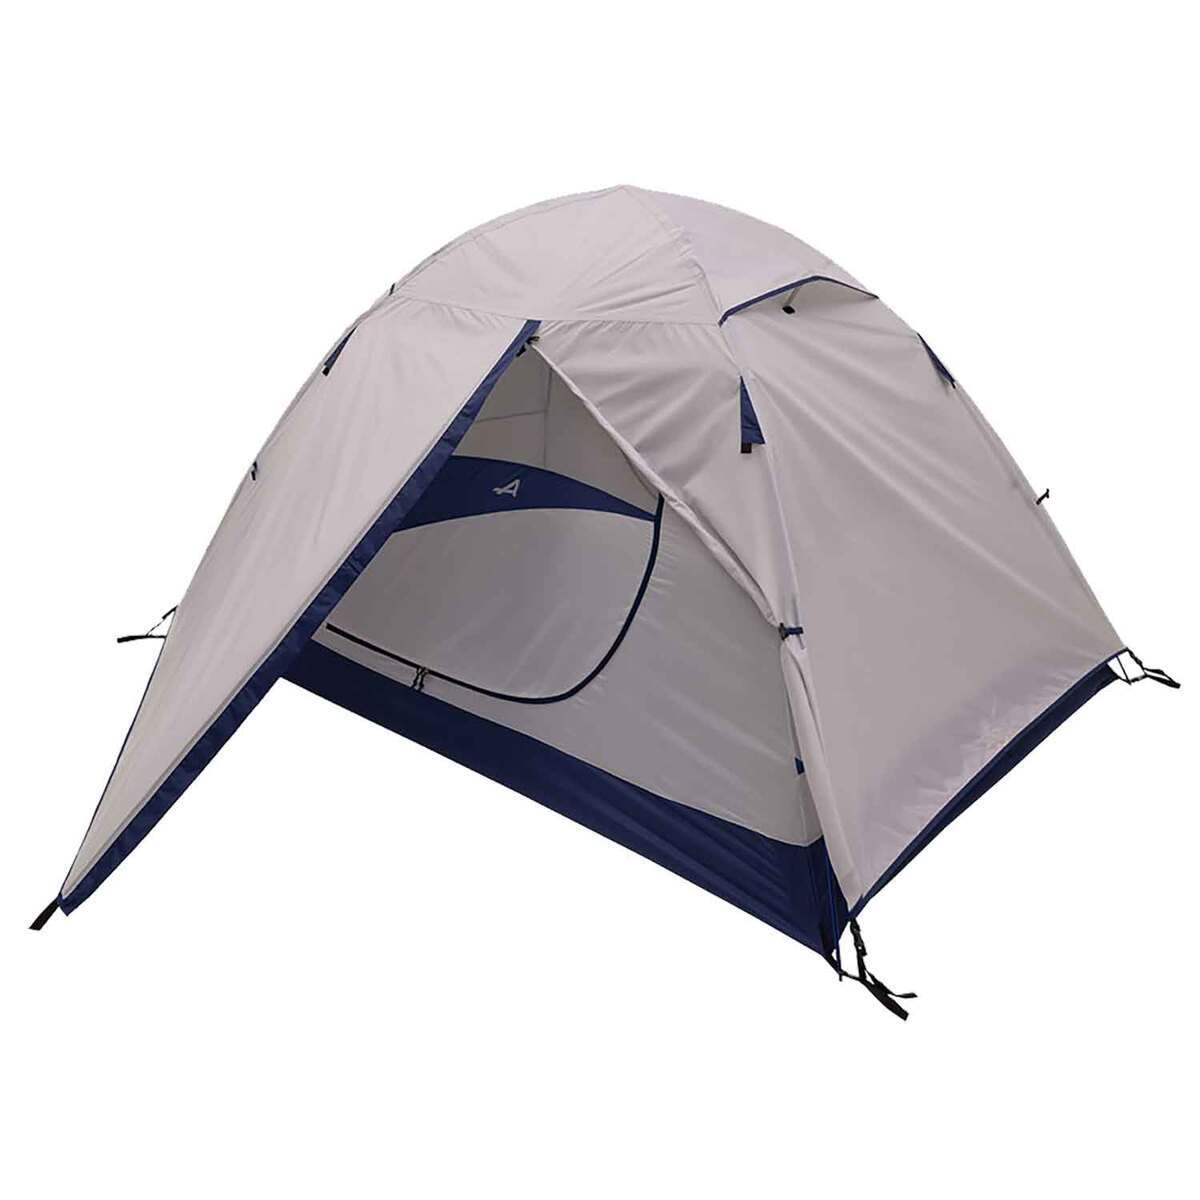 ALPS Mountaineering Lynx 4-Person Camping Tent - Gray/Navy